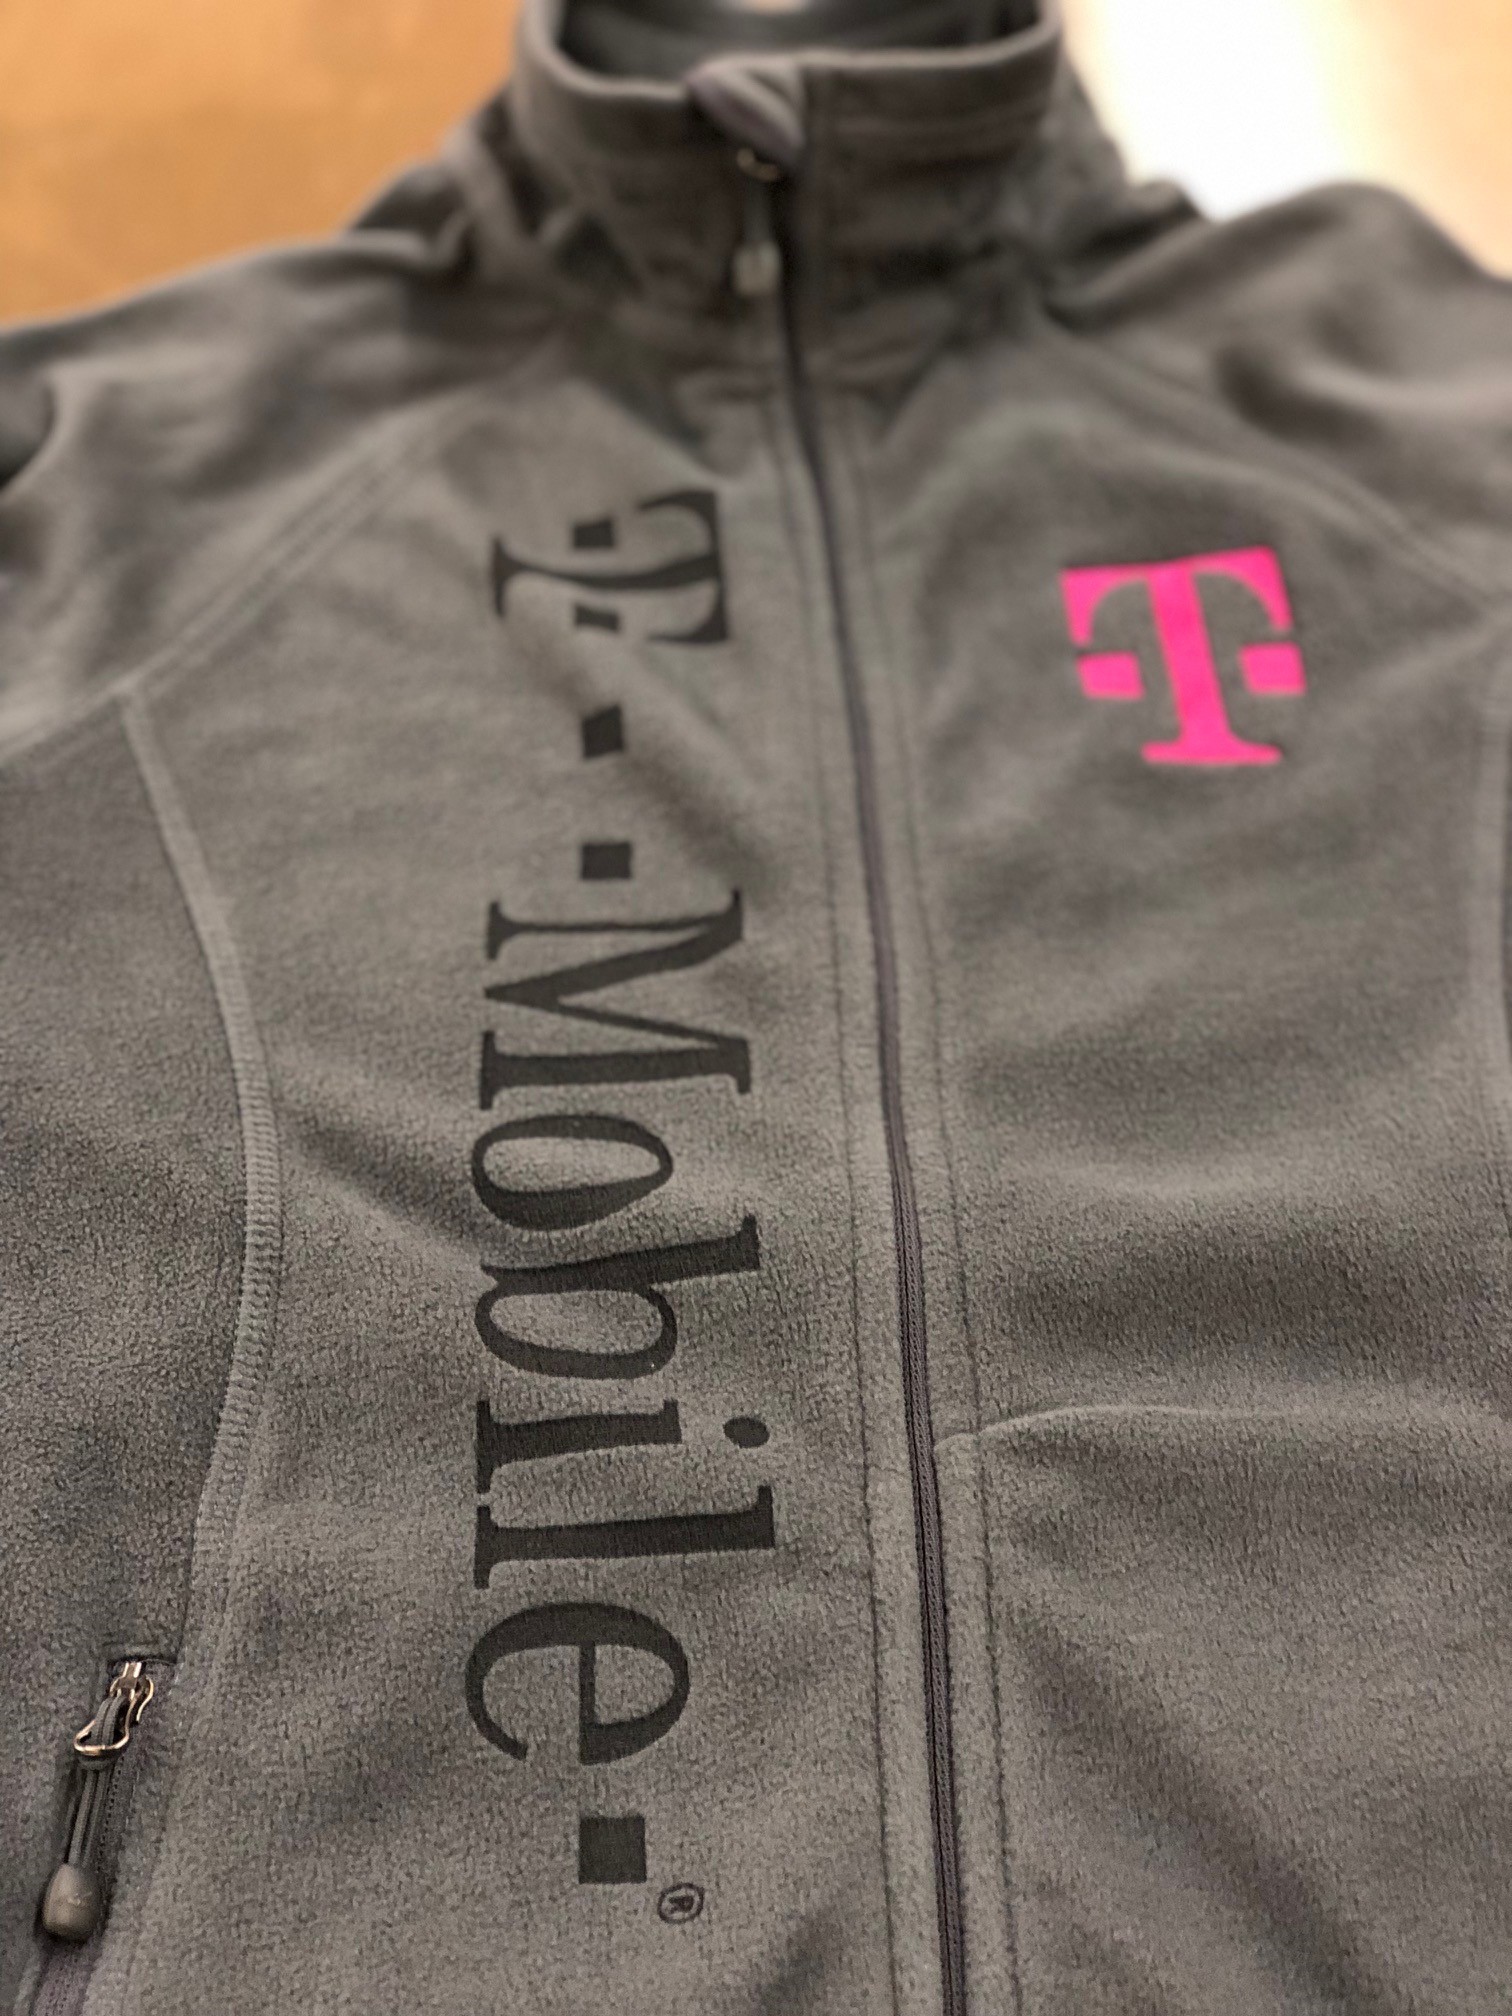 Laser Etched and Embroidered Fleece Jacket For T-Mobile